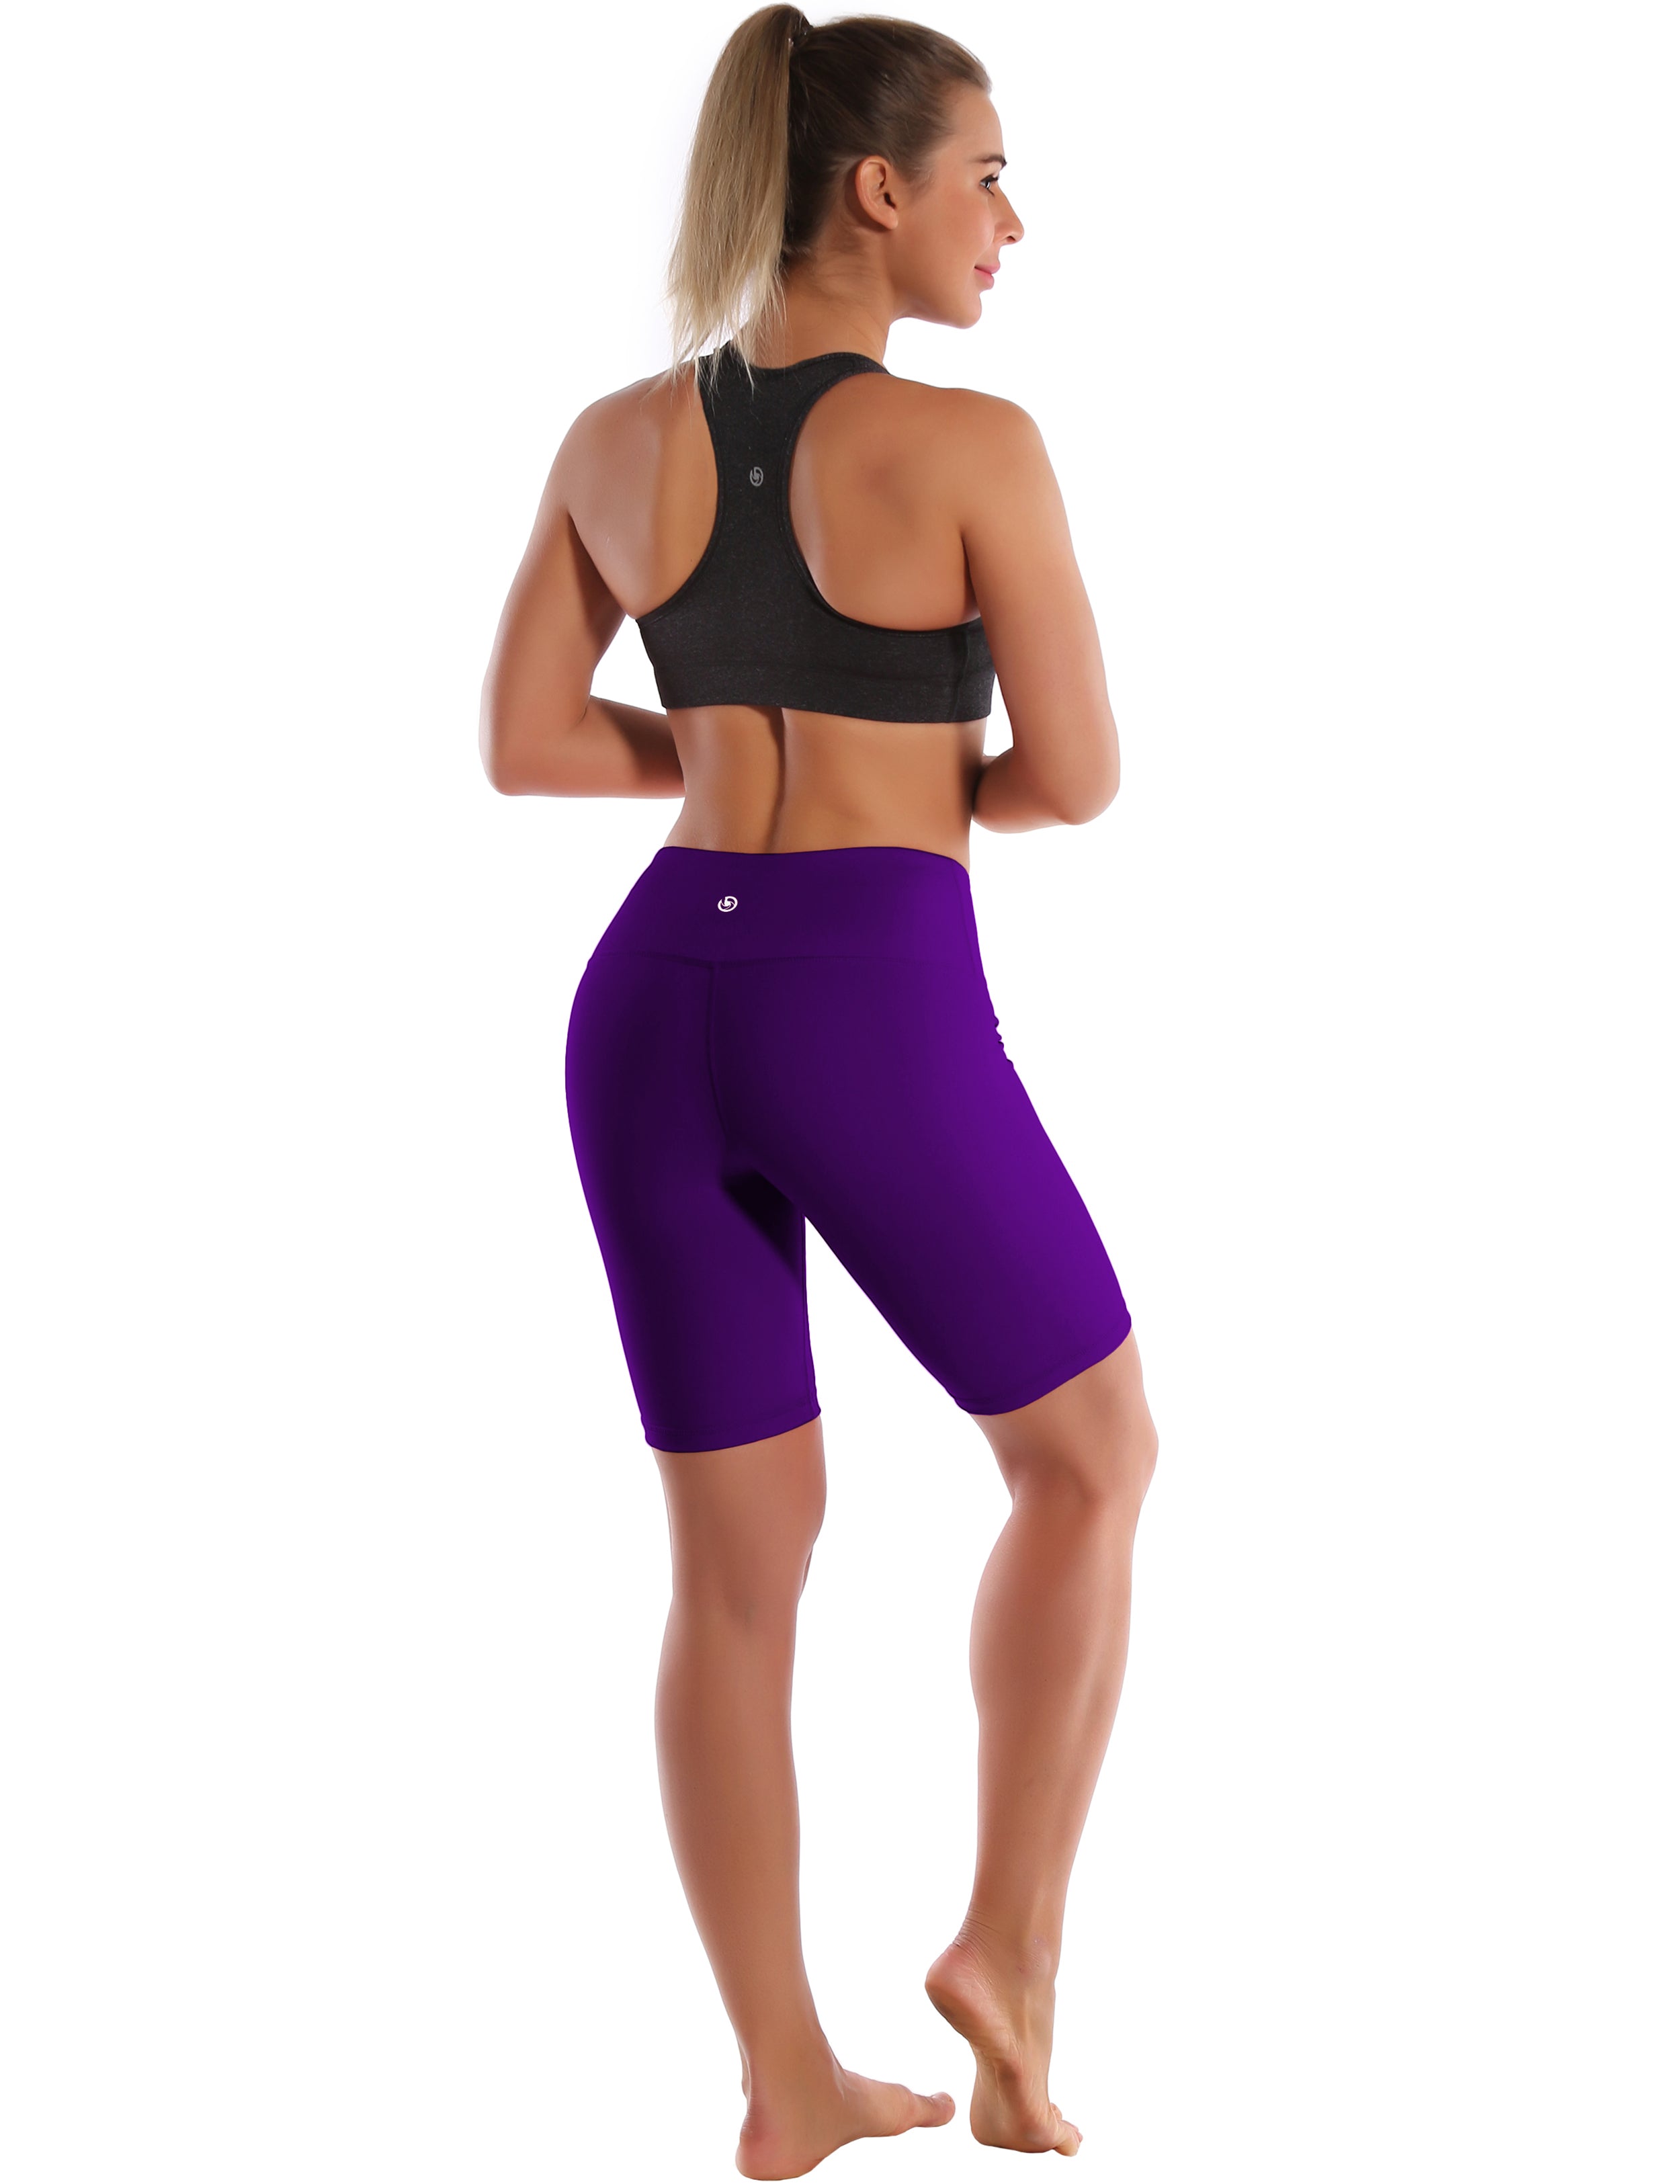 8" High Waist Yoga Shorts eggplantpurple Sleek, soft, smooth and totally comfortable: our newest style is here. Softest-ever fabric High elasticity High density 4-way stretch Fabric doesn't attract lint easily No see-through Moisture-wicking Machine wash 75% Nylon, 25% Spandex